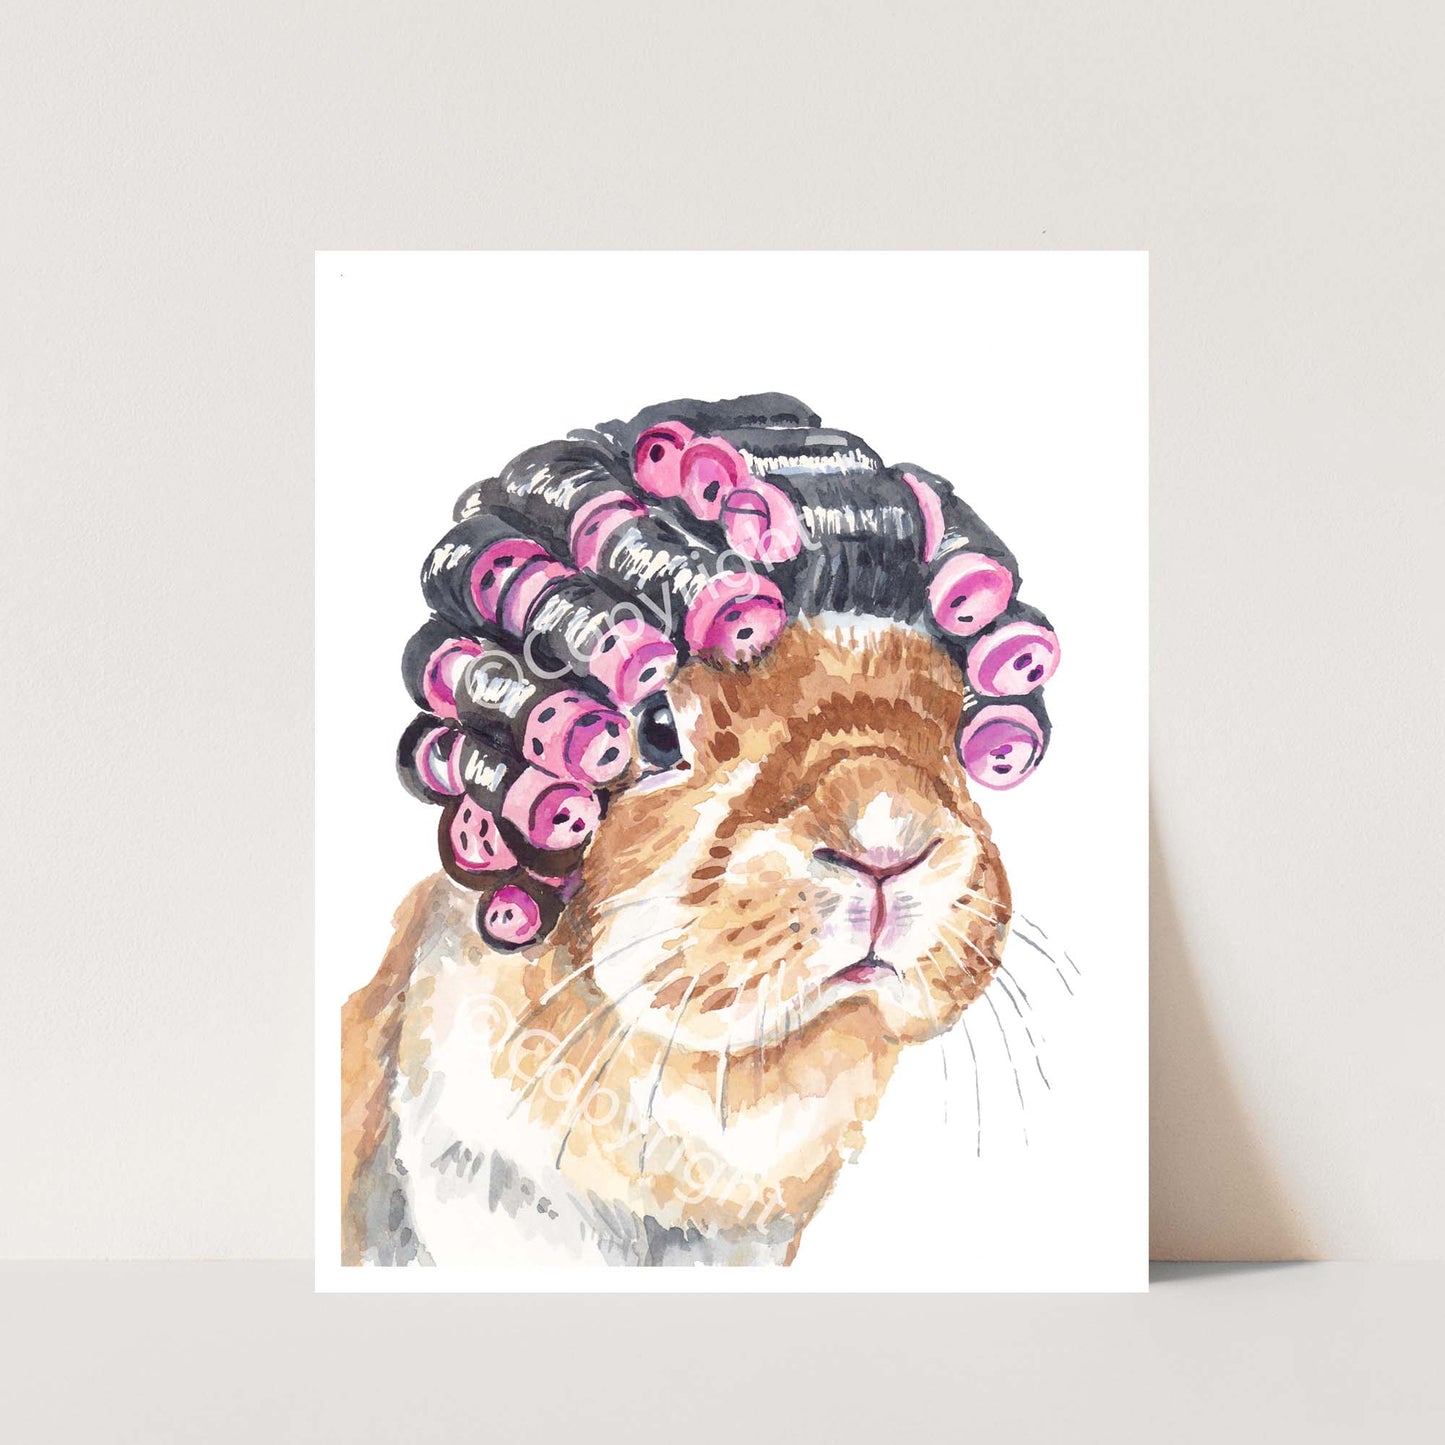 Watercolour painting featuring a lop eared bunny rabbit wearing bright pink hair curlers on her head by Deidre Wicks